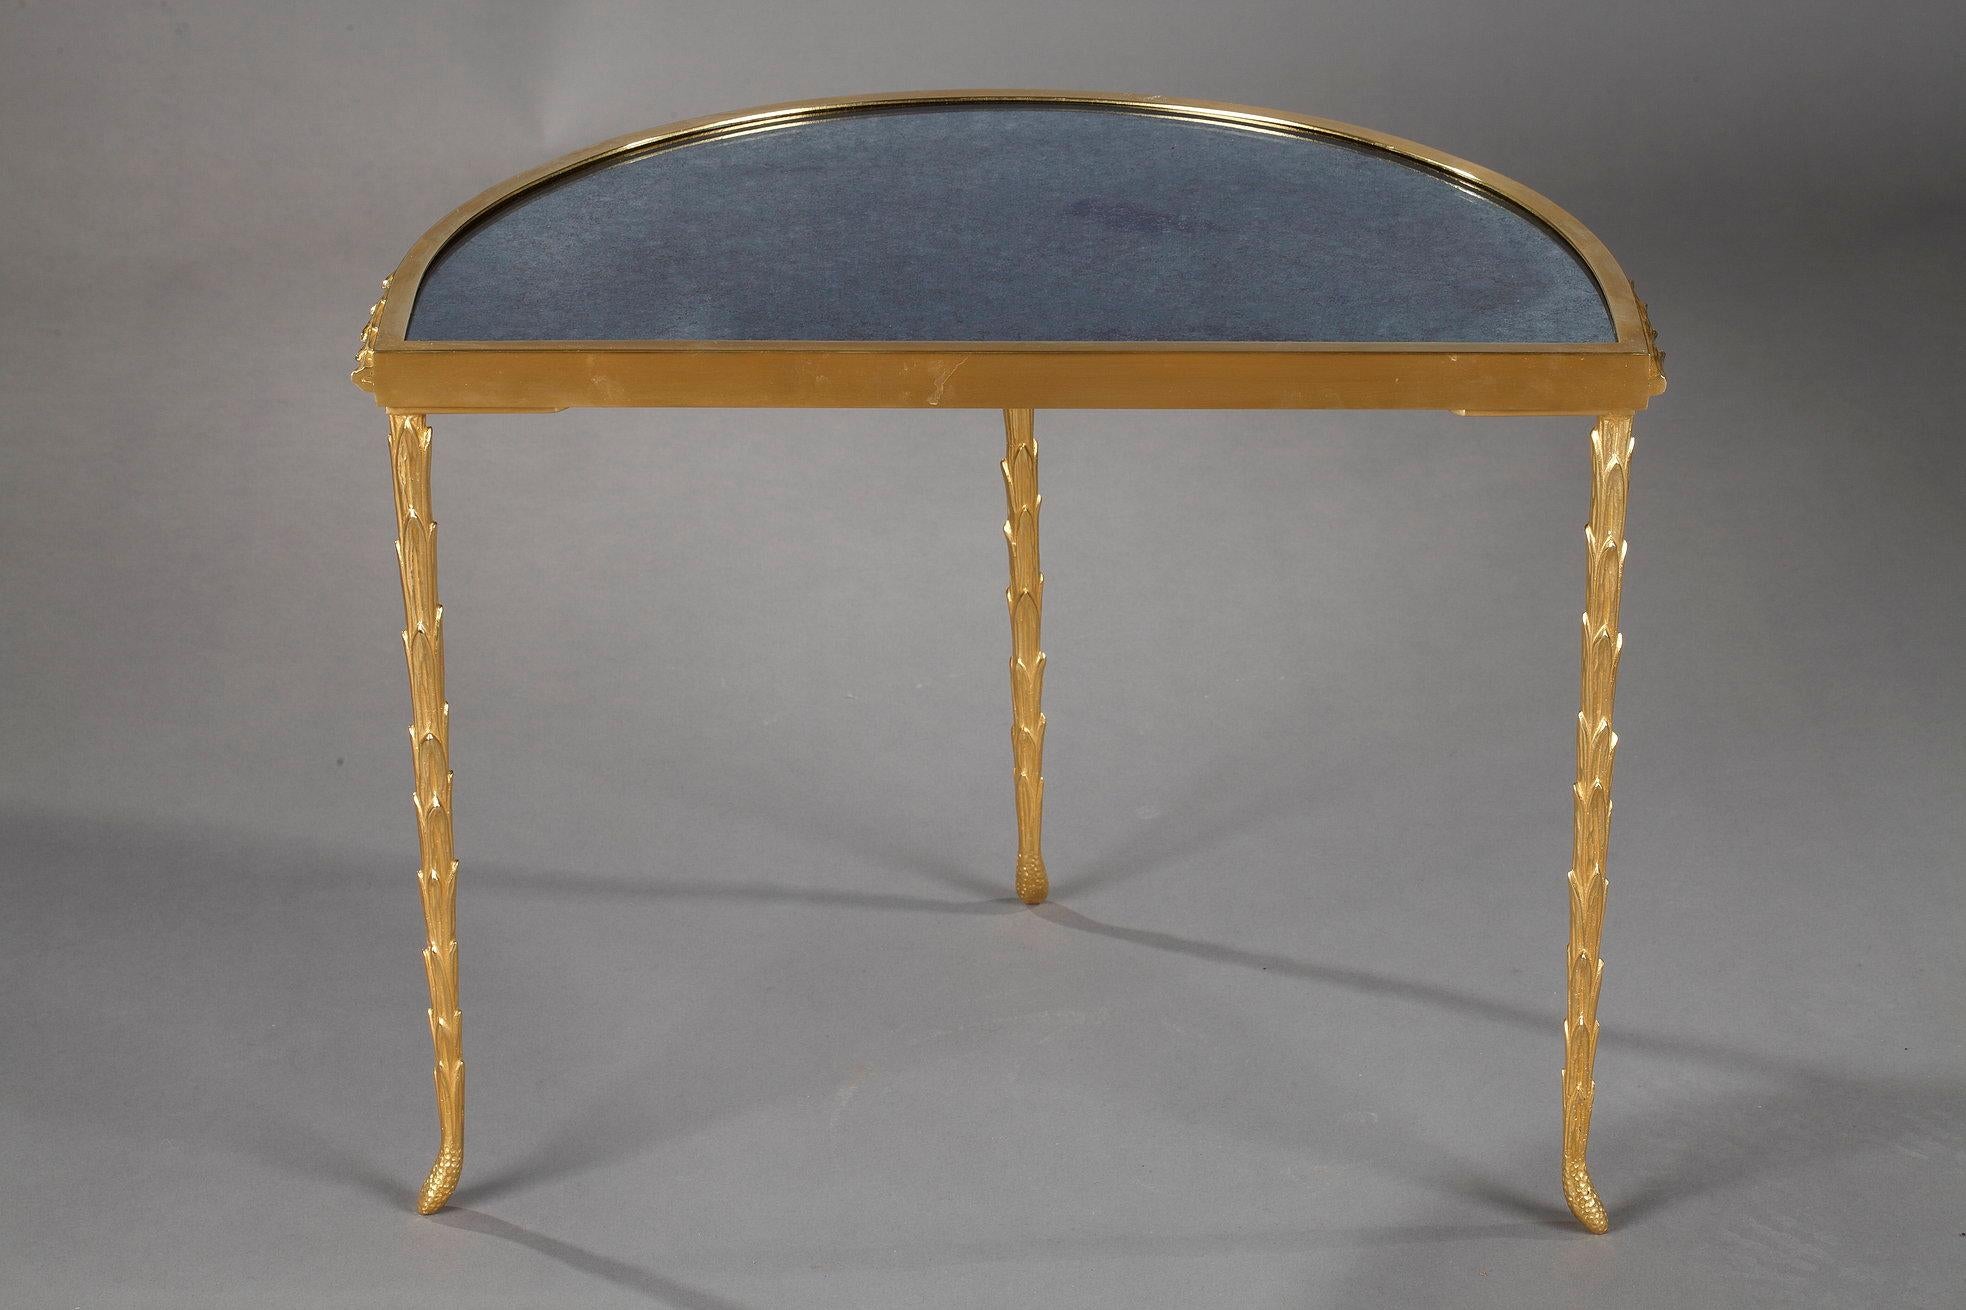 Gilt Small Half Moon Table with Aged Mirror Top in Bronze, Maison Baguès For Sale